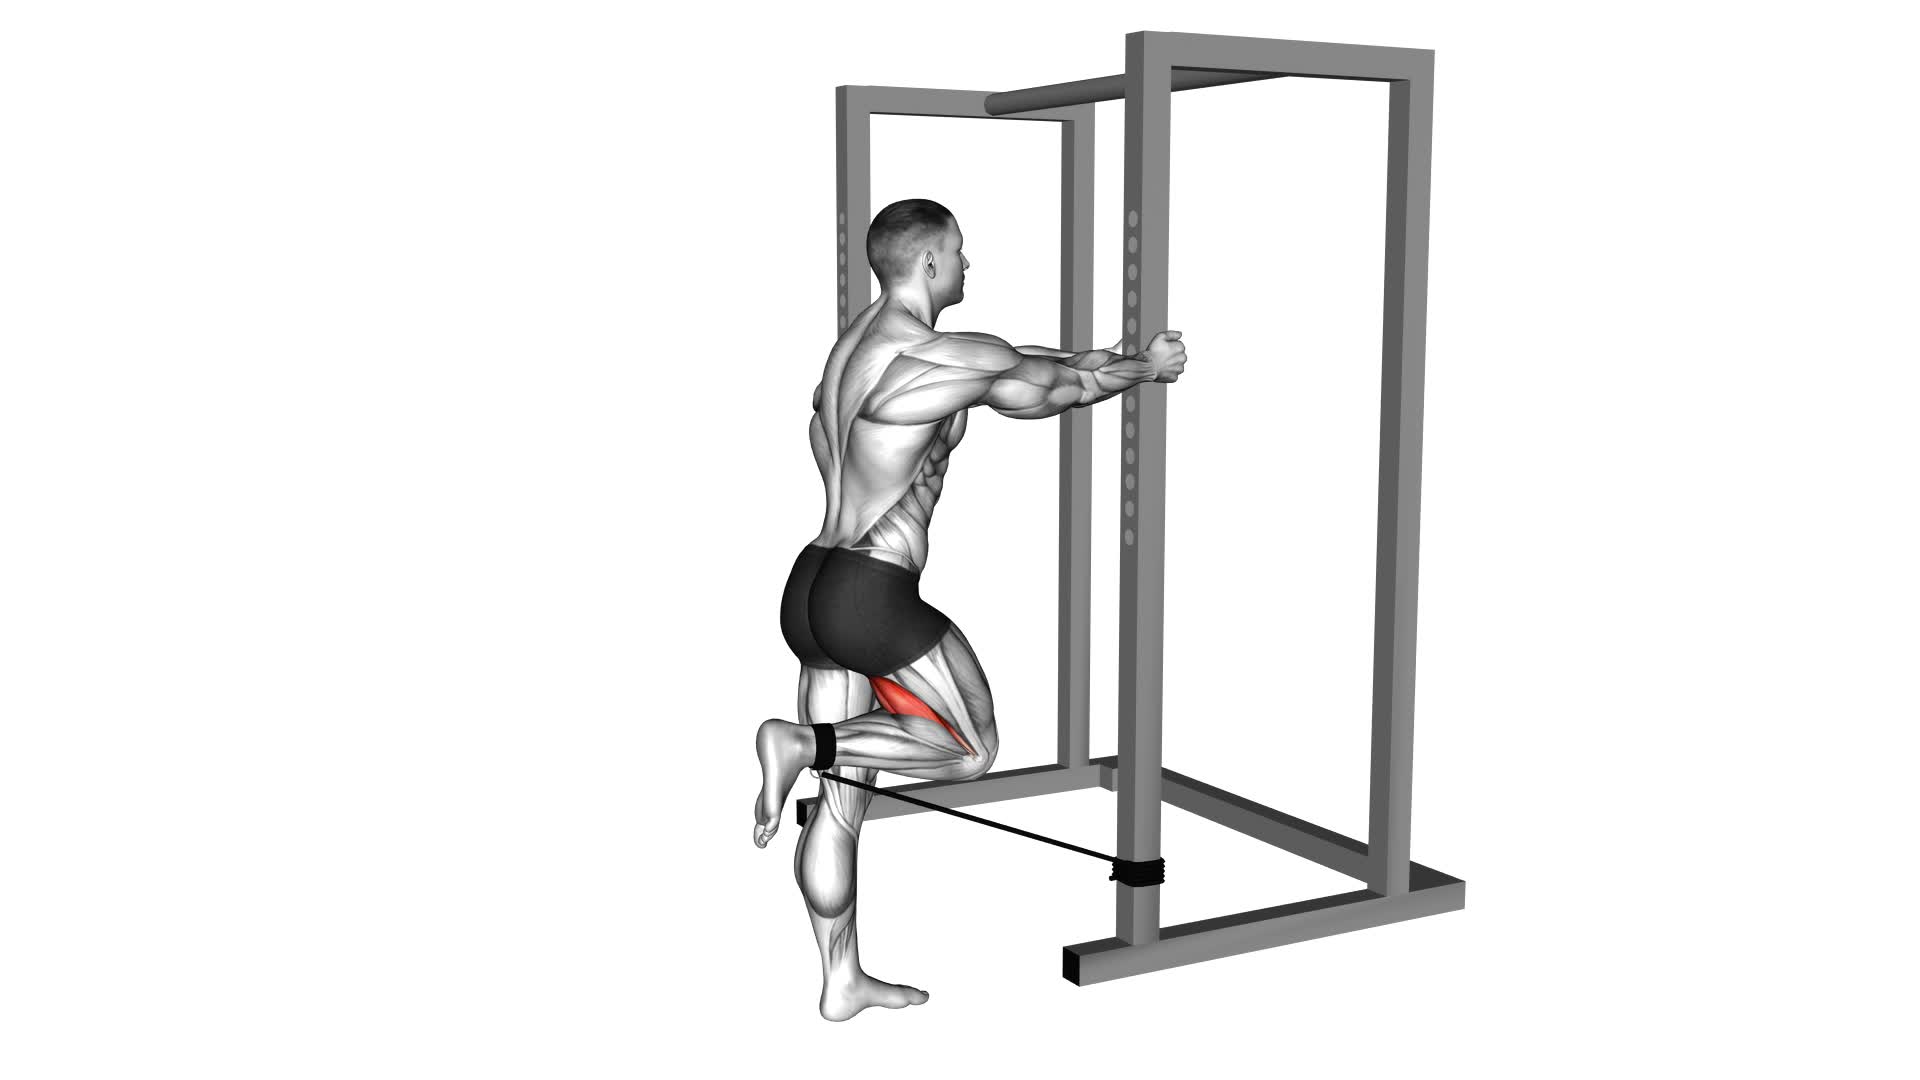 Band Standing Leg Curl (male) - Video Exercise Guide & Tips